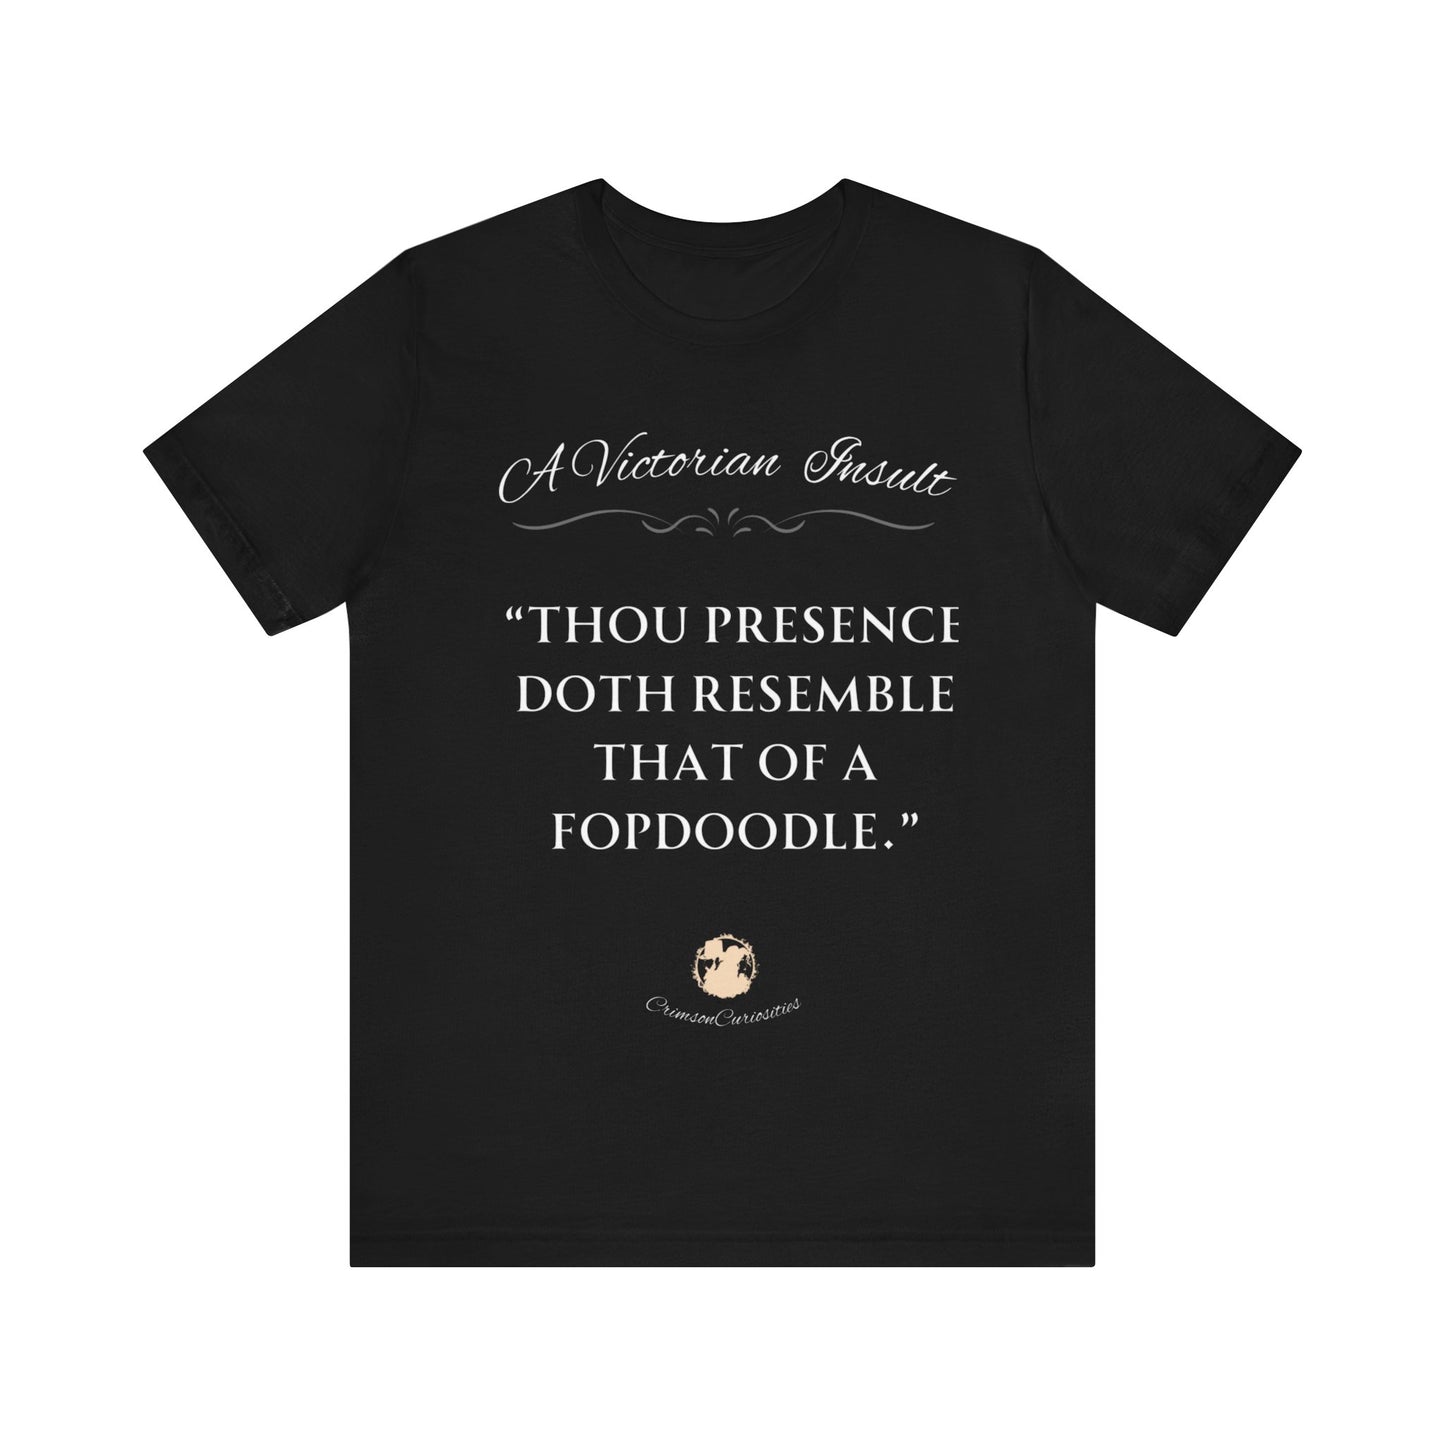 A Victorian Insult Tee: Fopdoodle